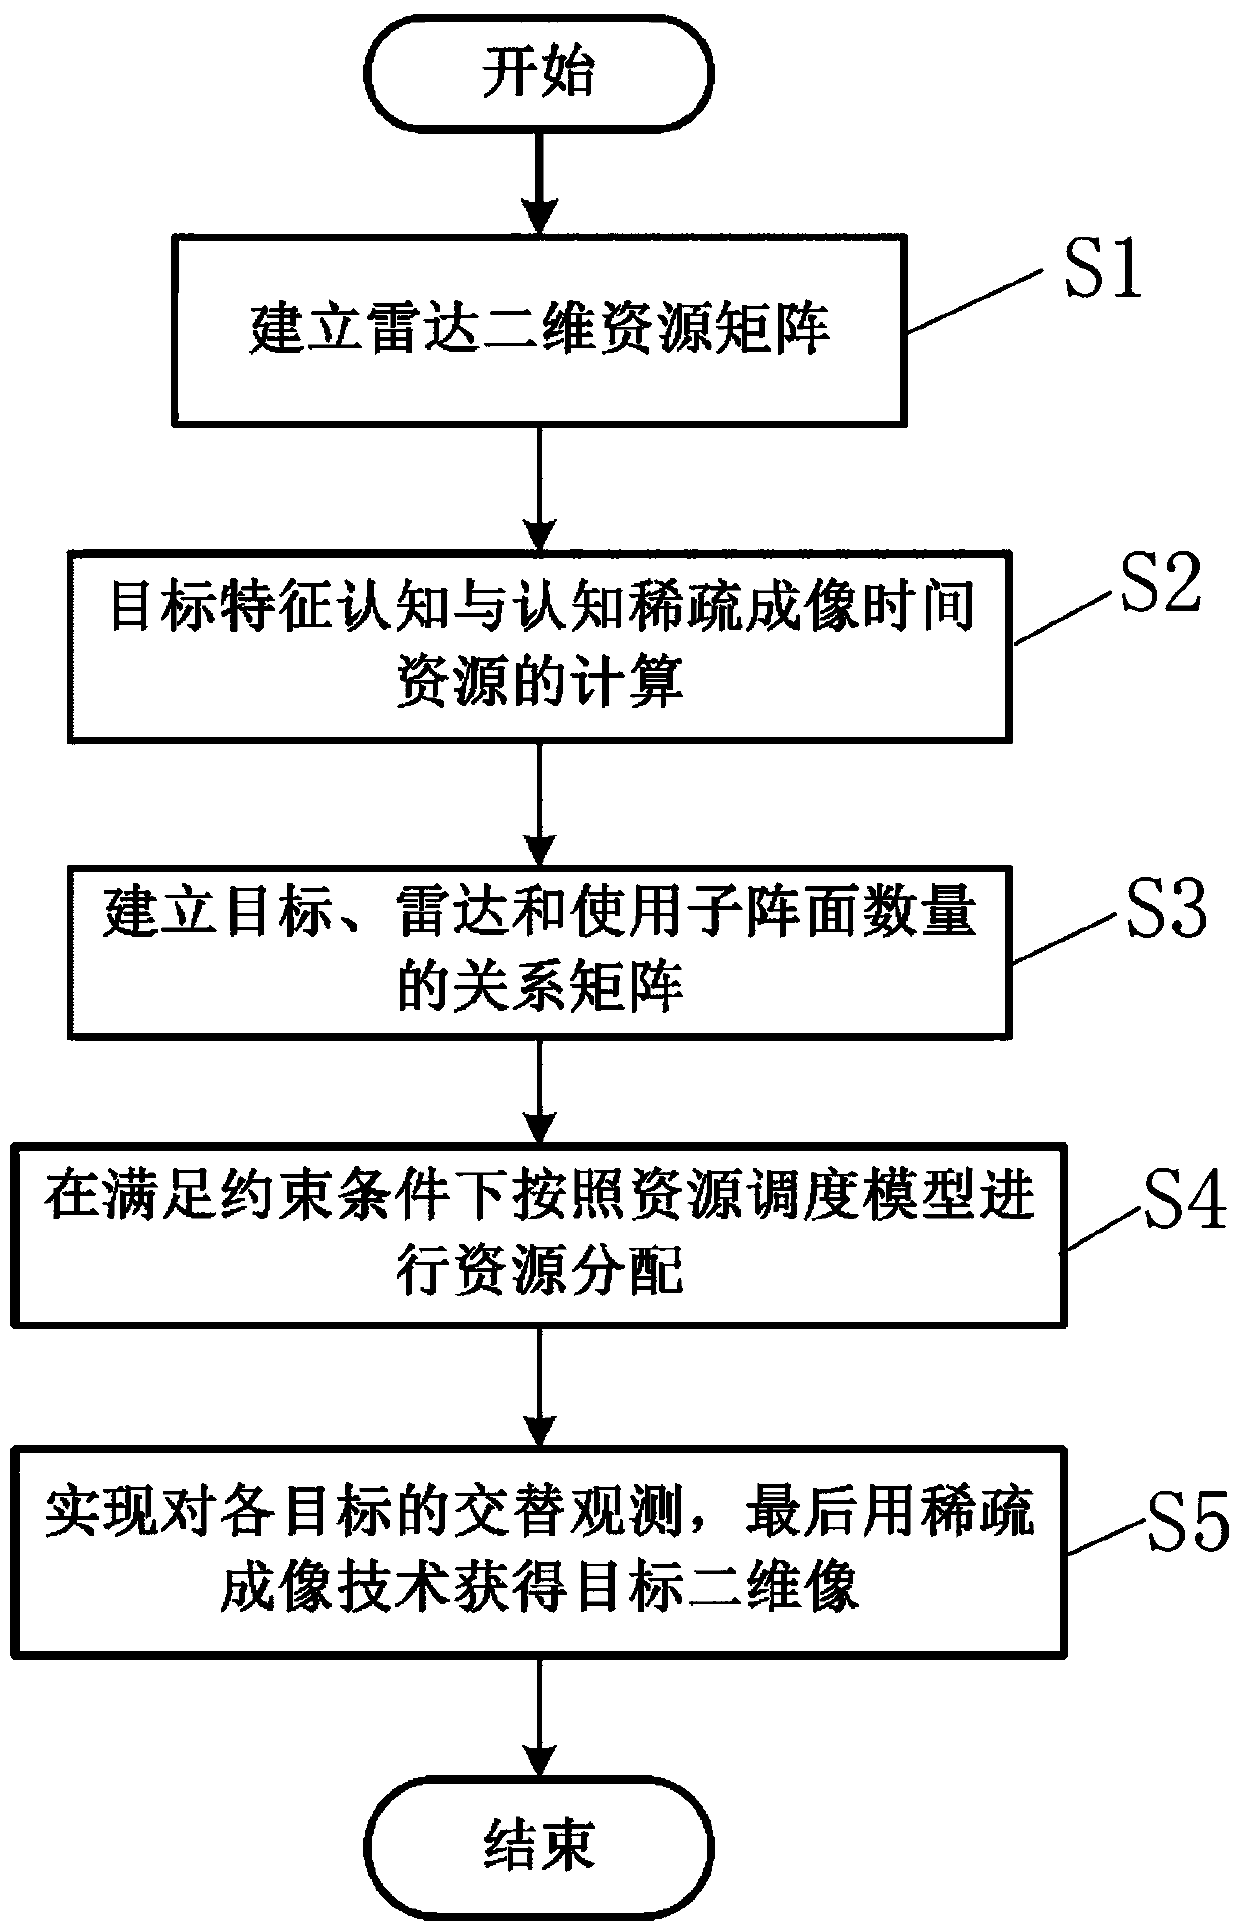 Two-dimensional resource allocation method for networking radar multi-target ISAR imaging